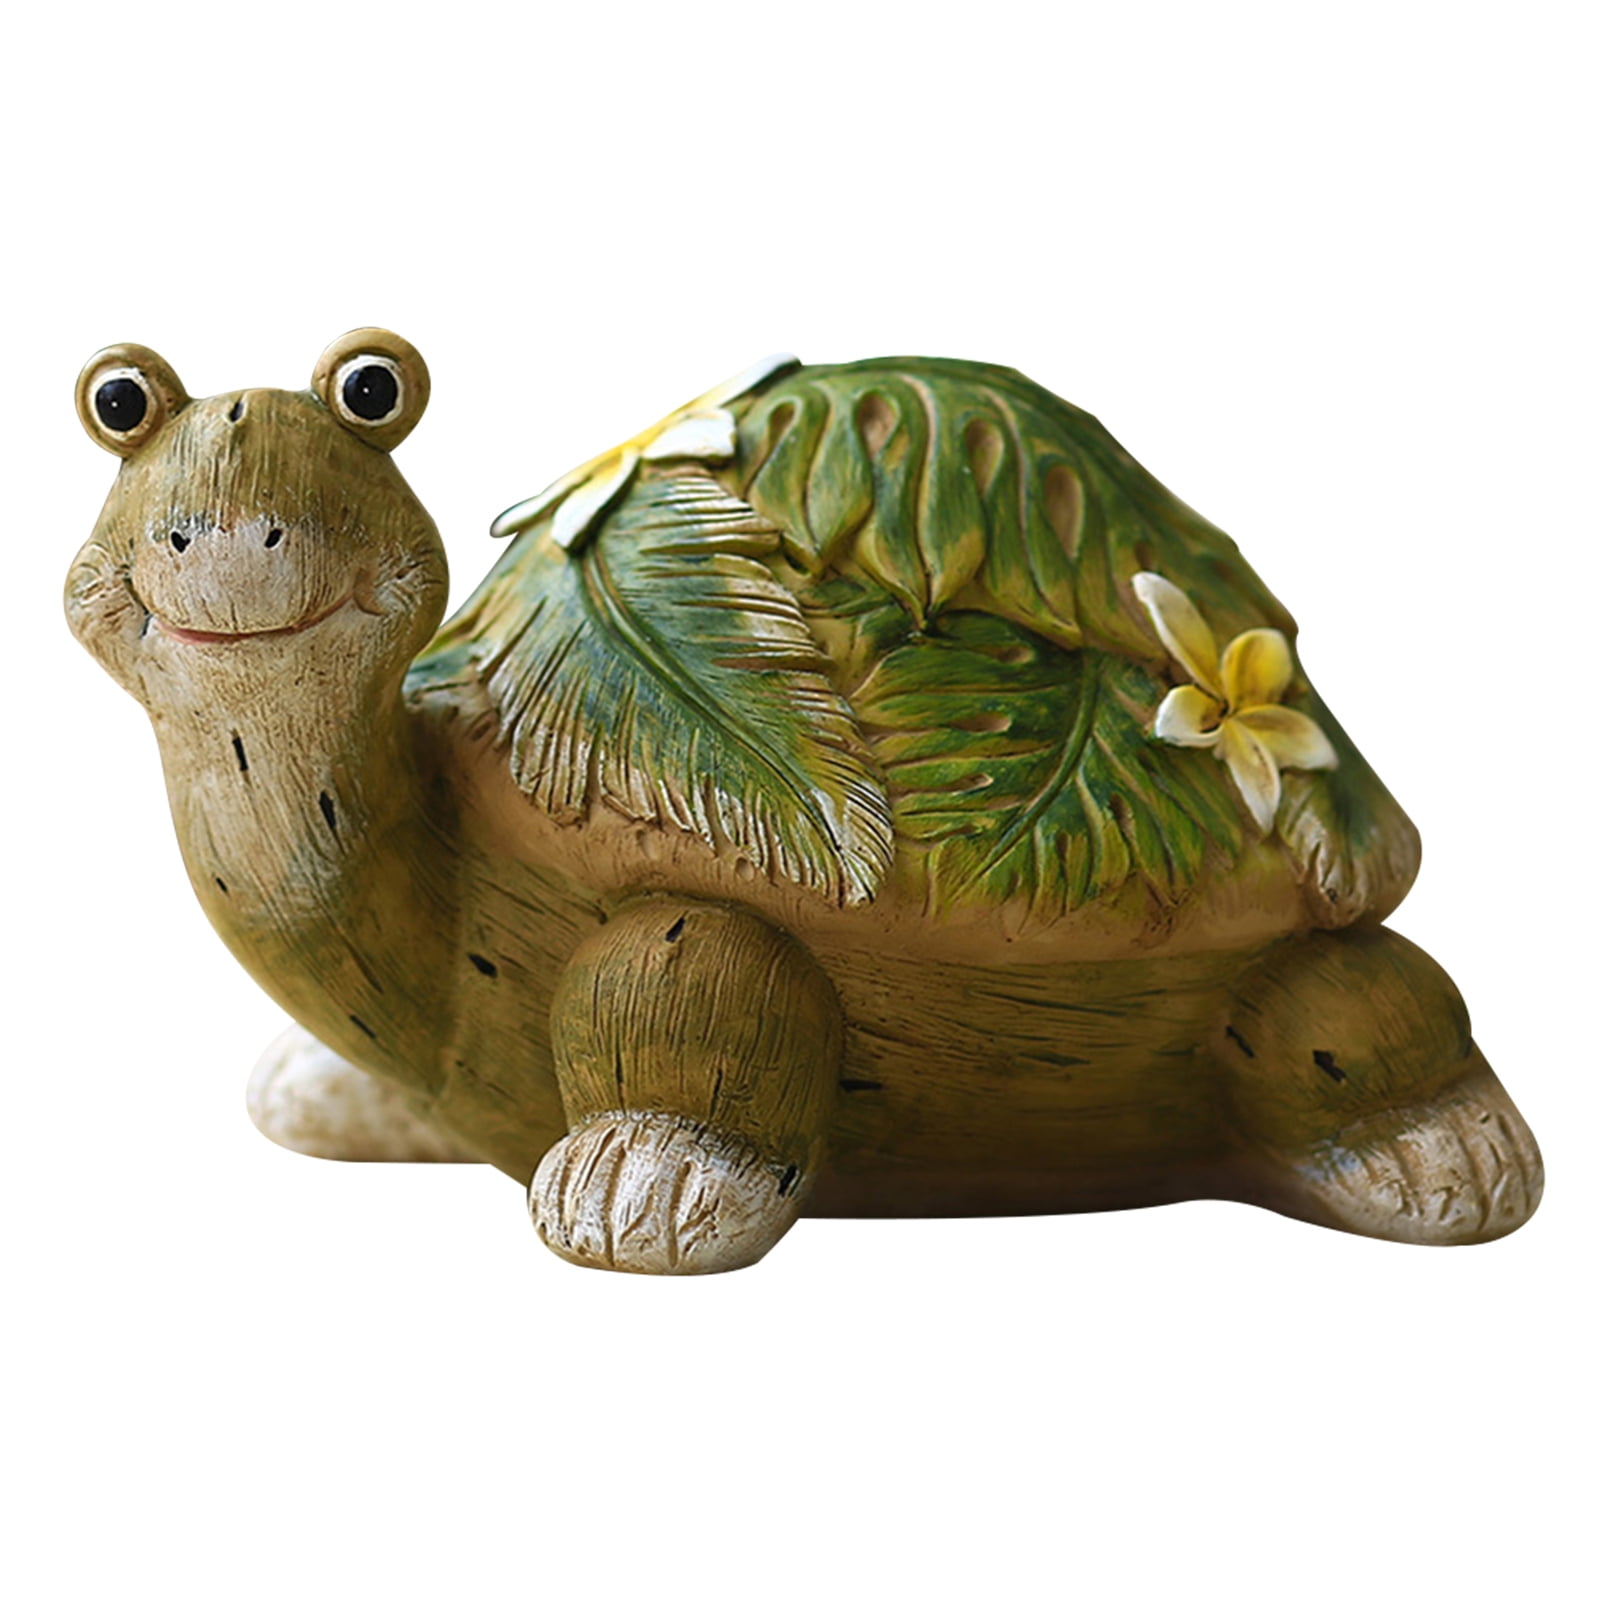 Natural World Collection Polished Stone Effect 2 Turtles Swimming Gift Ornament 